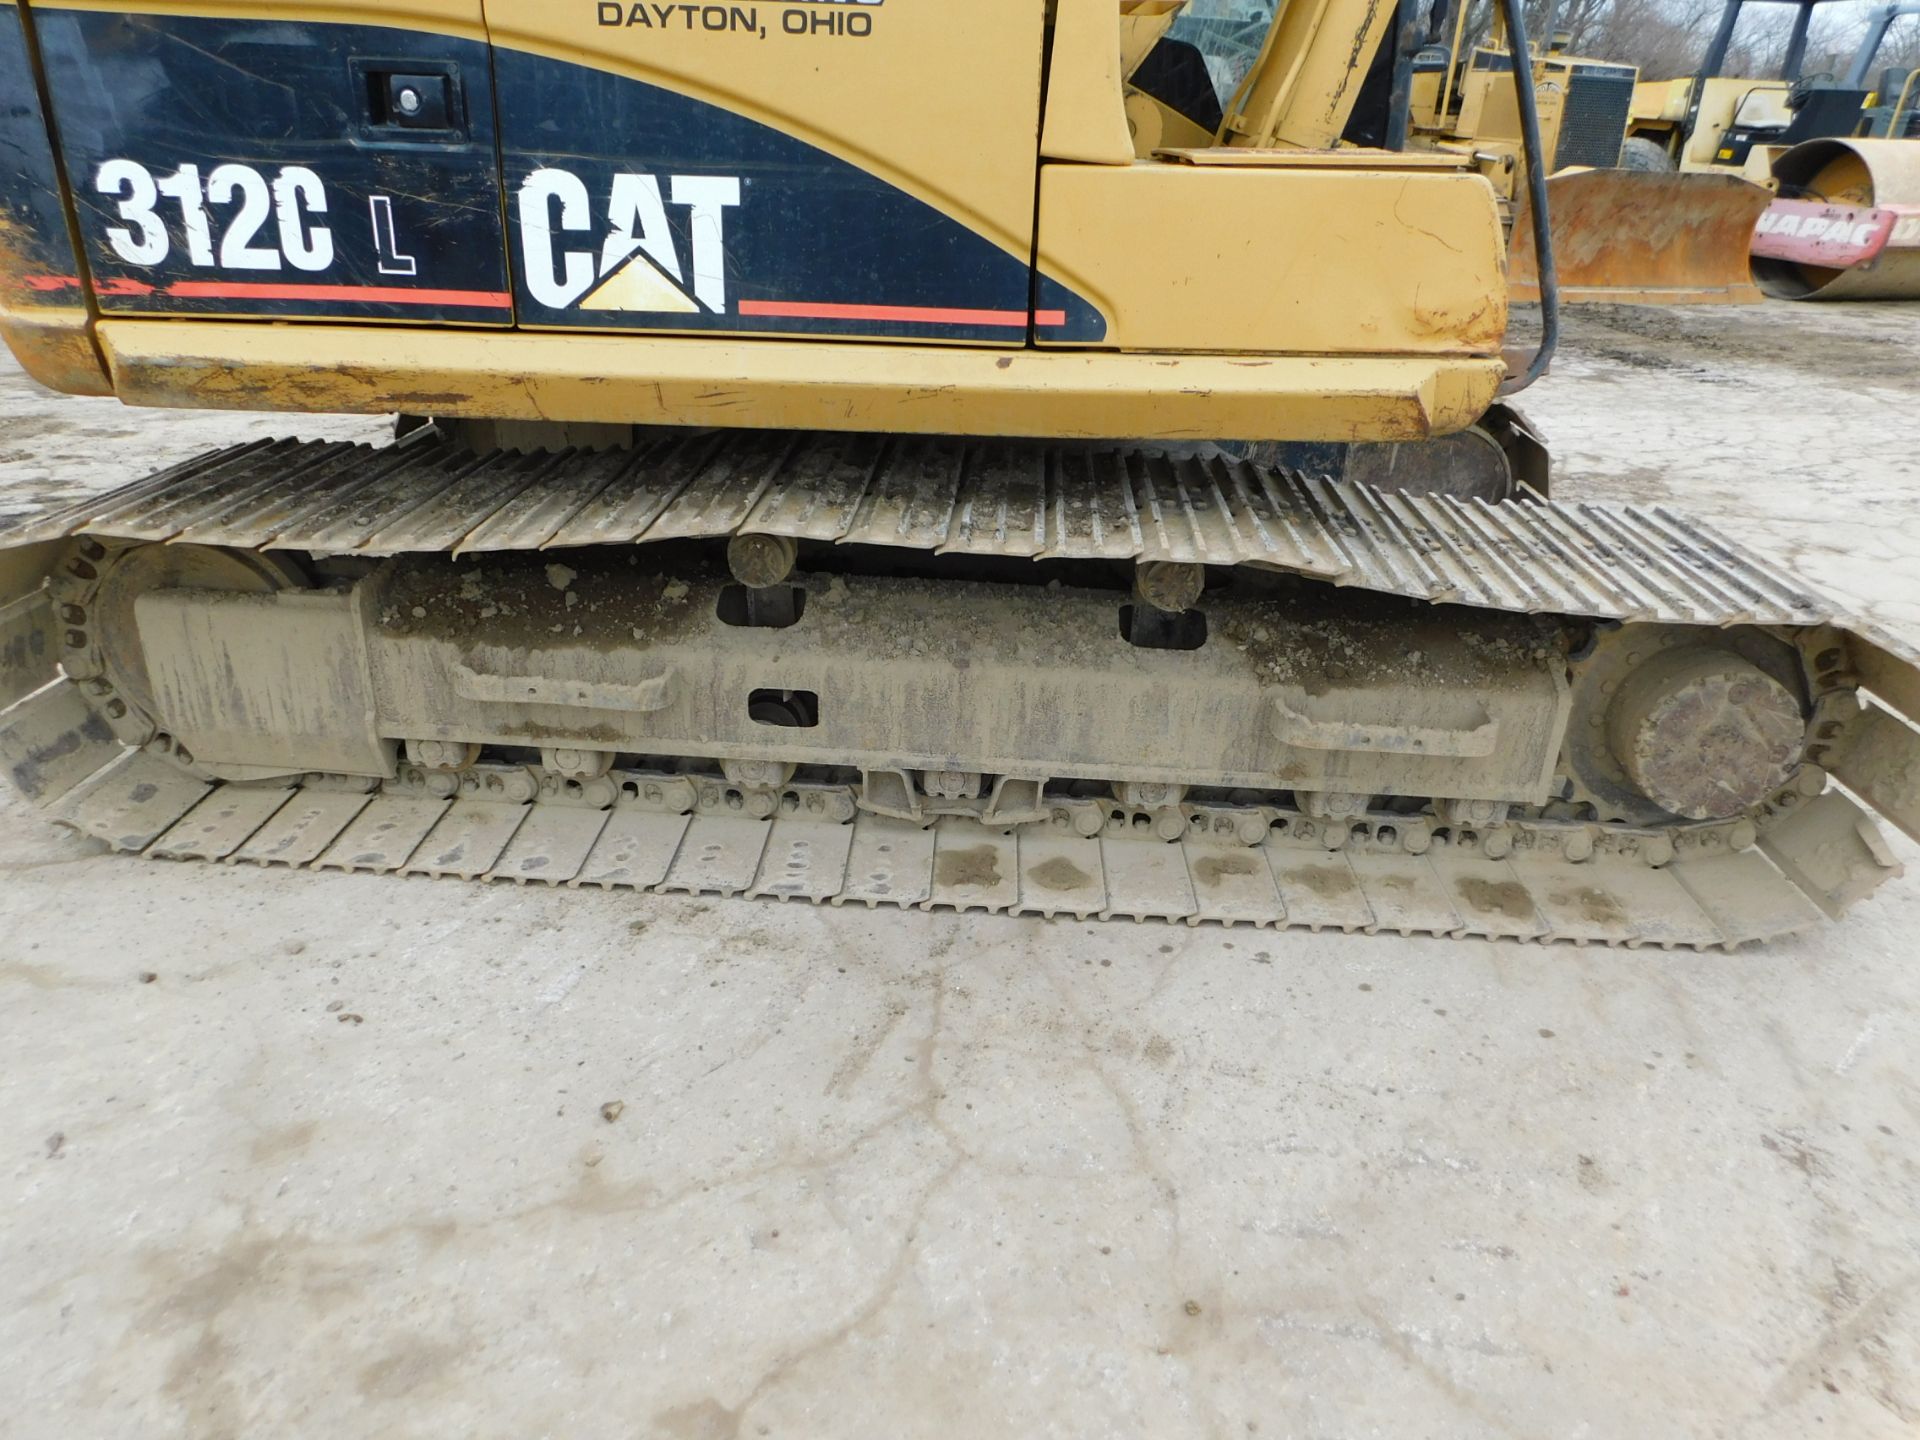 2005 Caterpillar 312 CL Excavator, Enclosed Cab, 48" Bucket, 28" Tracks, 6,943 hours, SN - Image 12 of 28